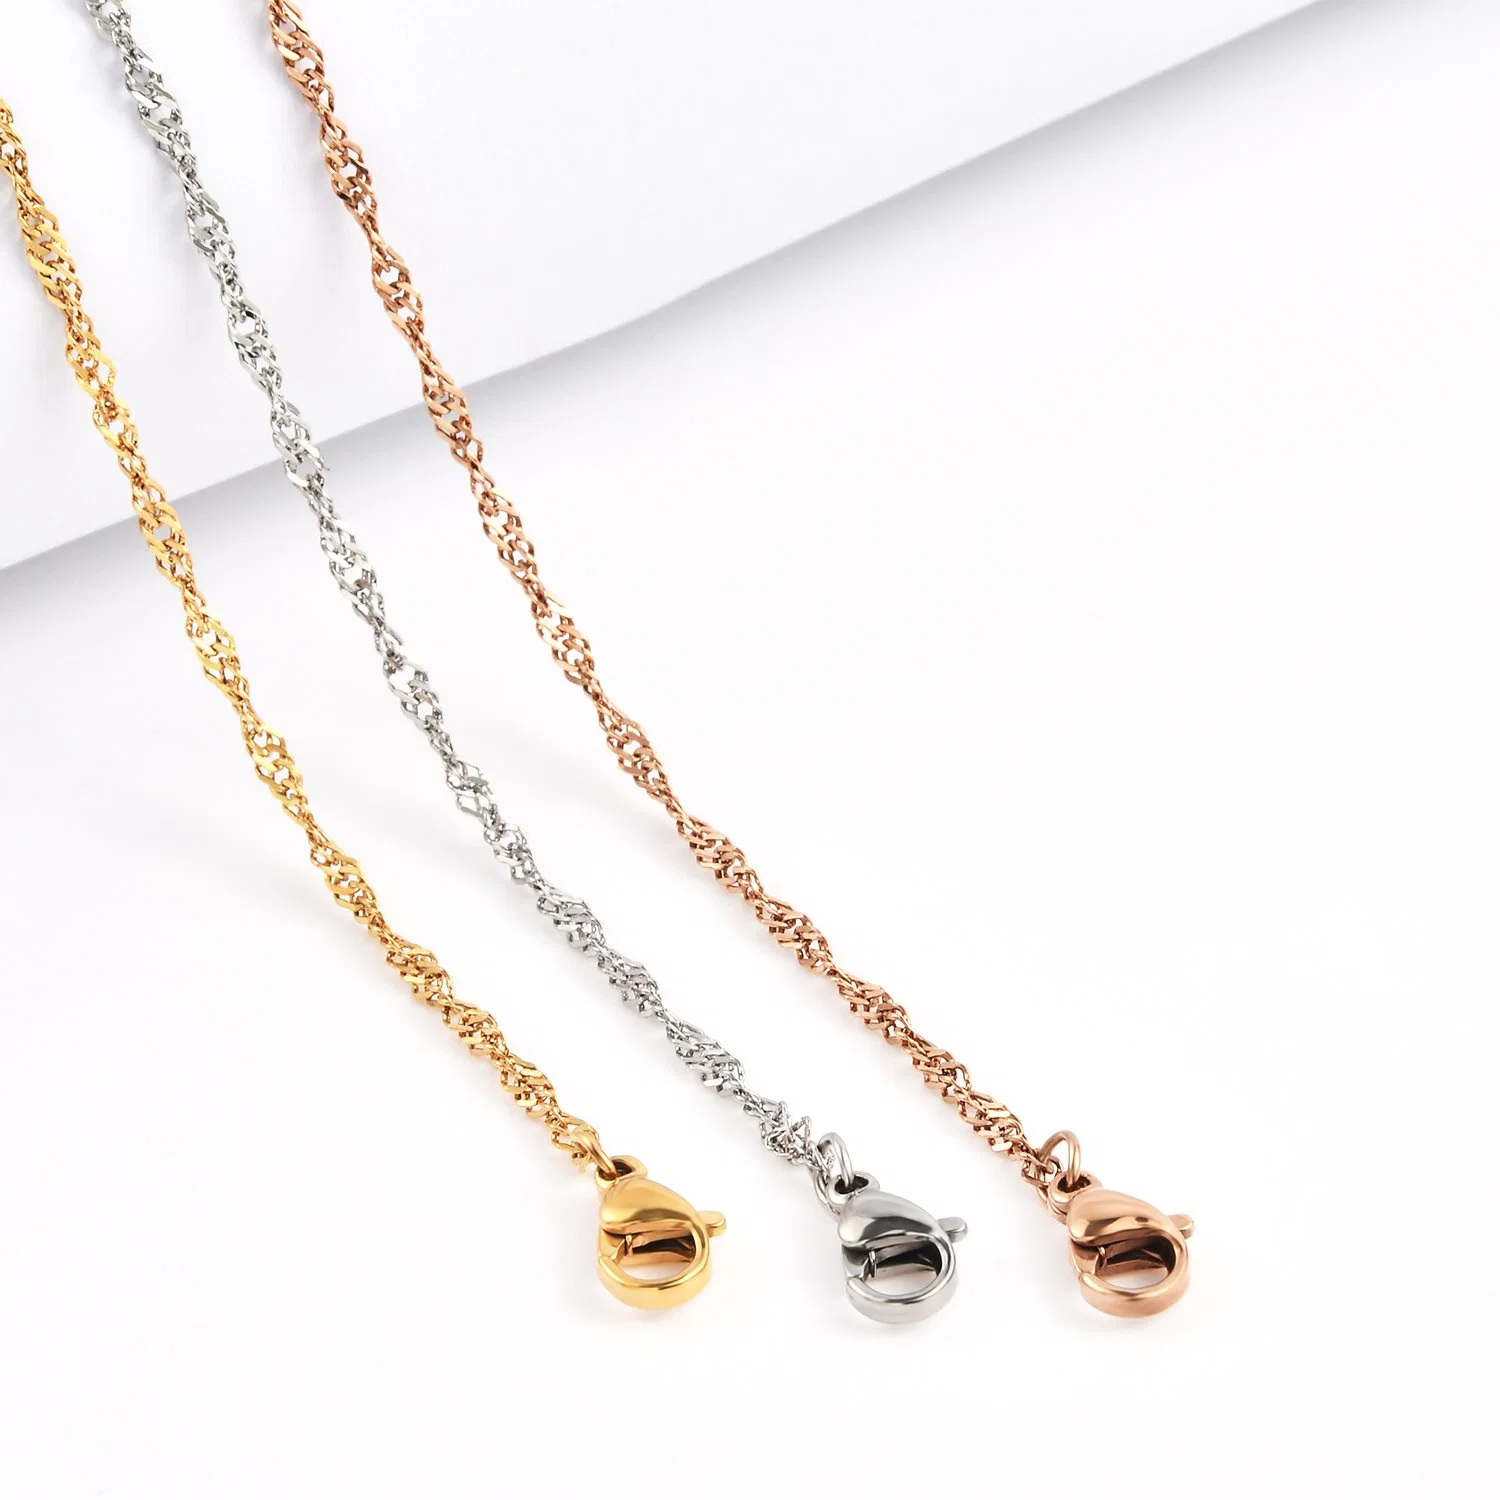 Hot Sellling Imitation Gold Plated Rose Gold Stainless Steel Necklace Anklet Bracelet Making Chain Fashion Jewelry